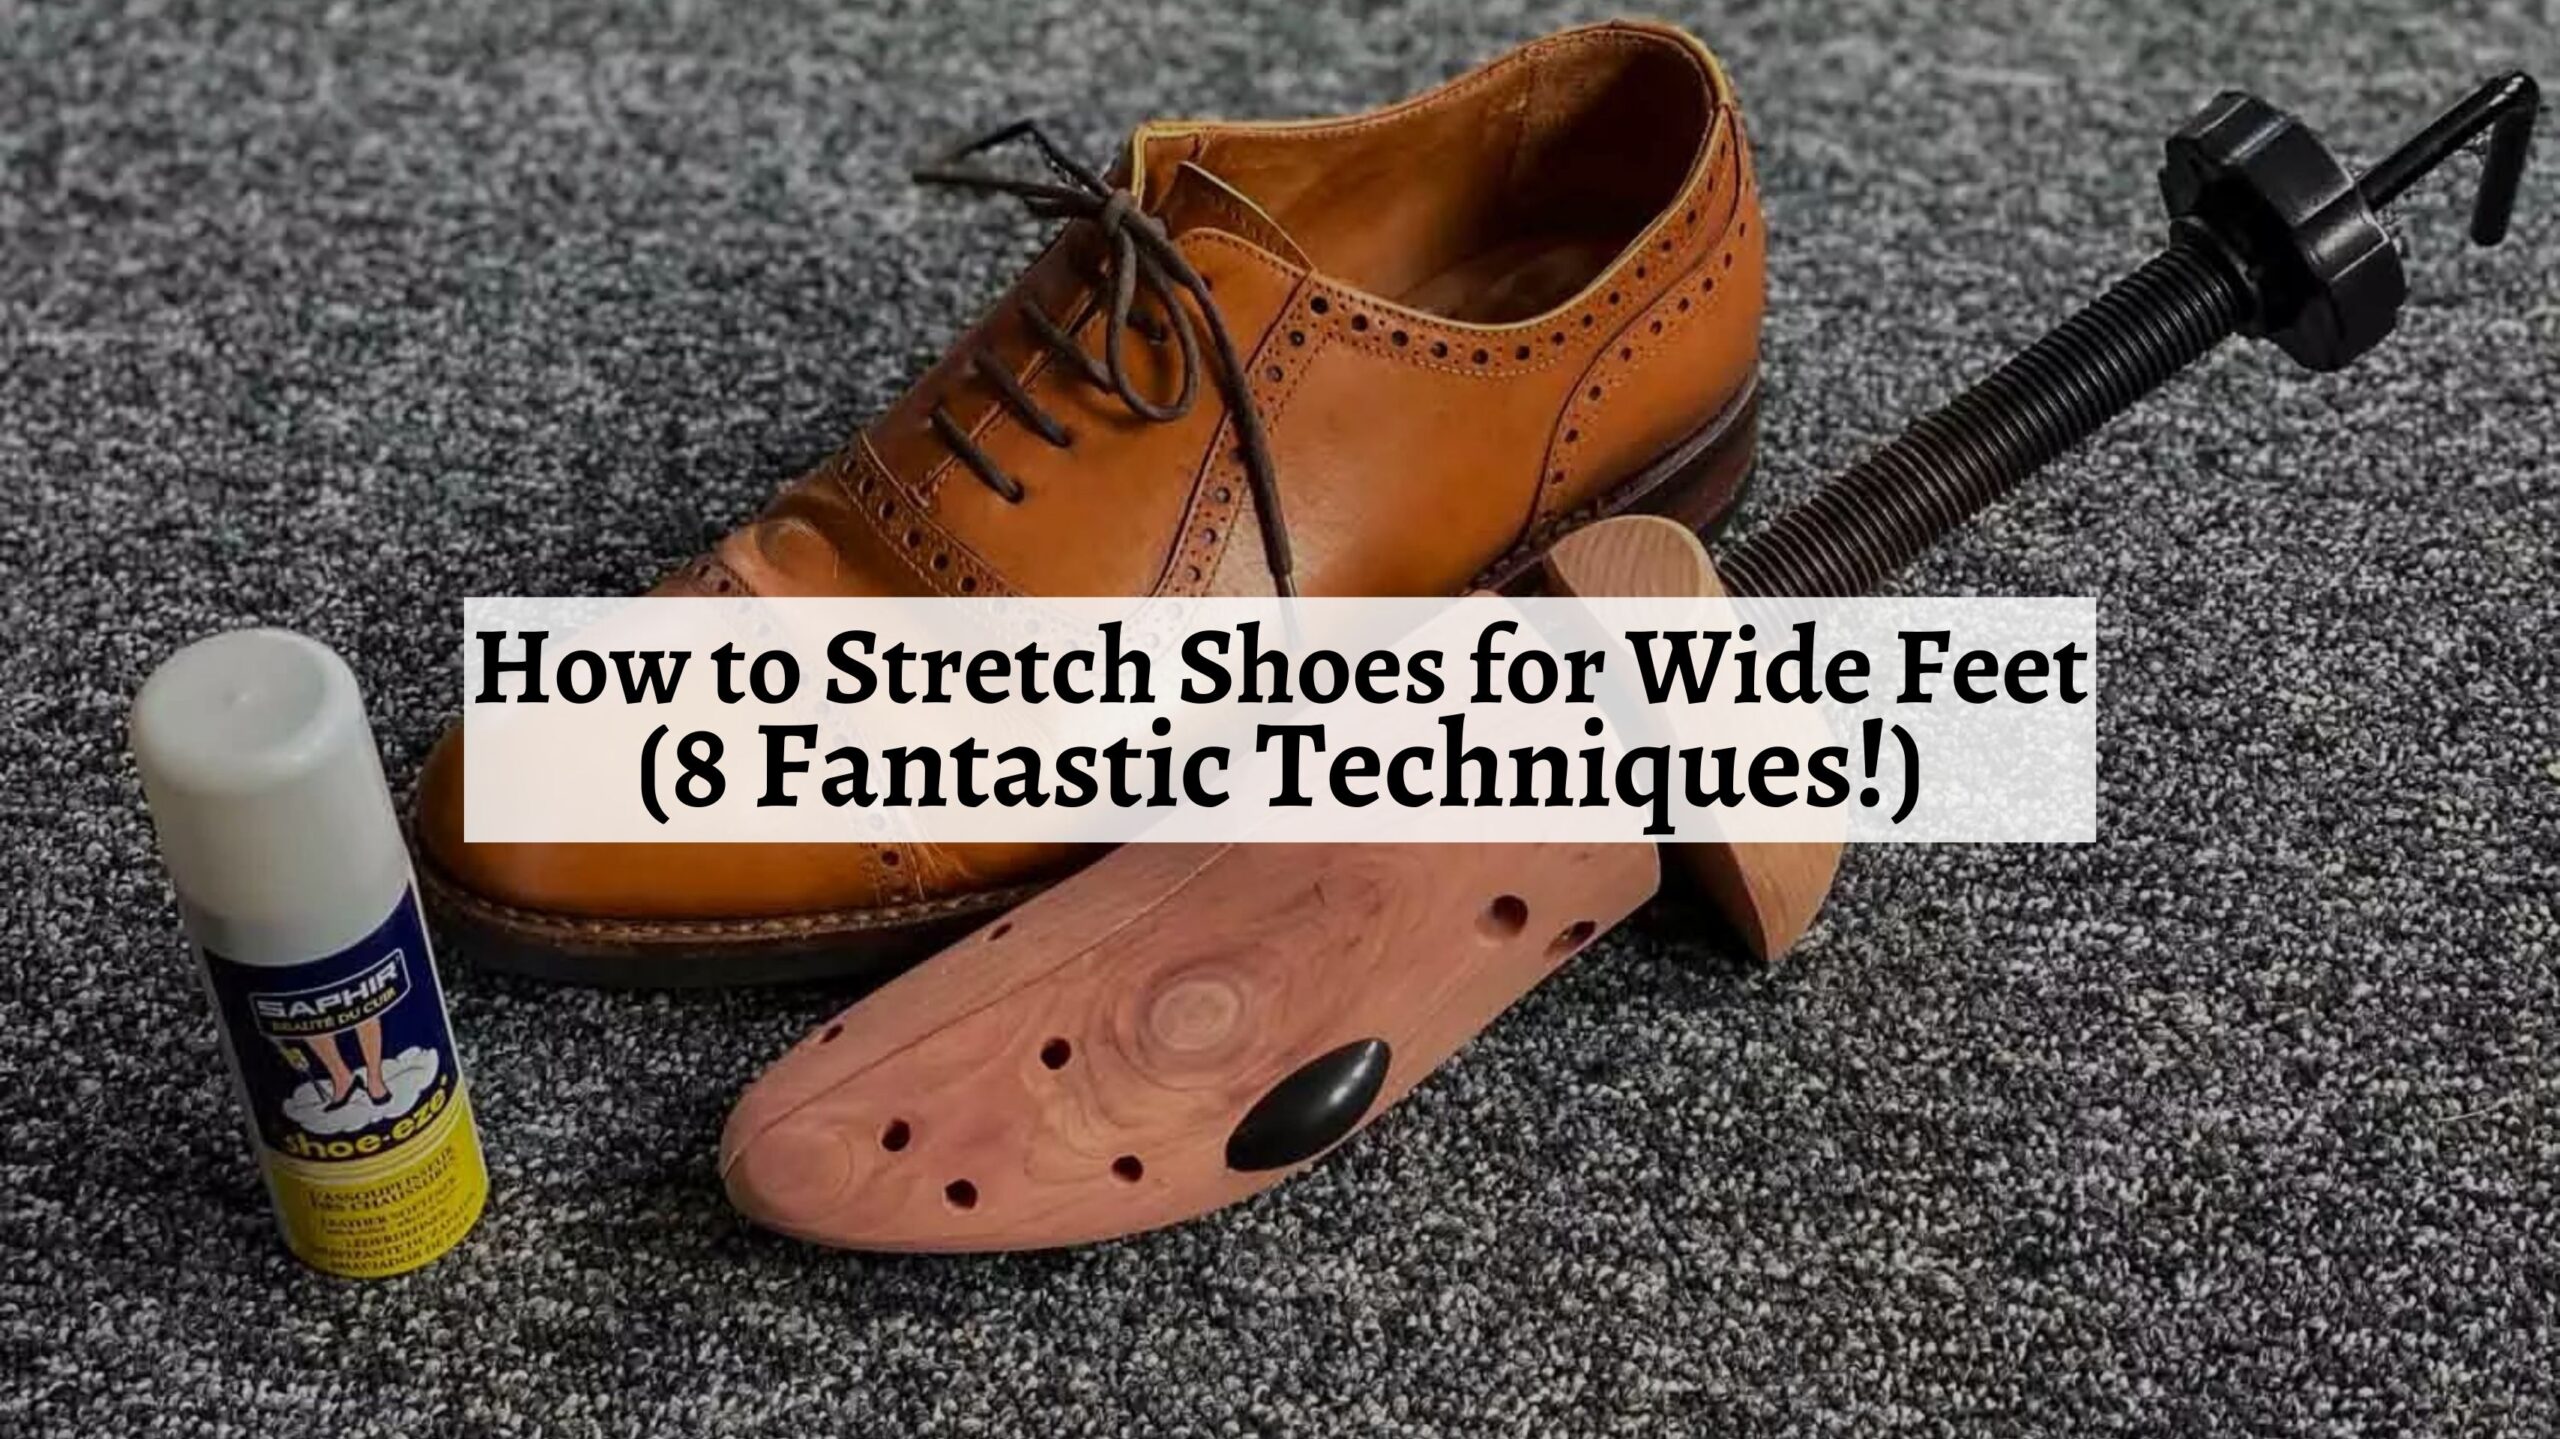 How to Stretch Shoes for Wide Feet (8 Fantastic Techniques!) - Shoe Filter